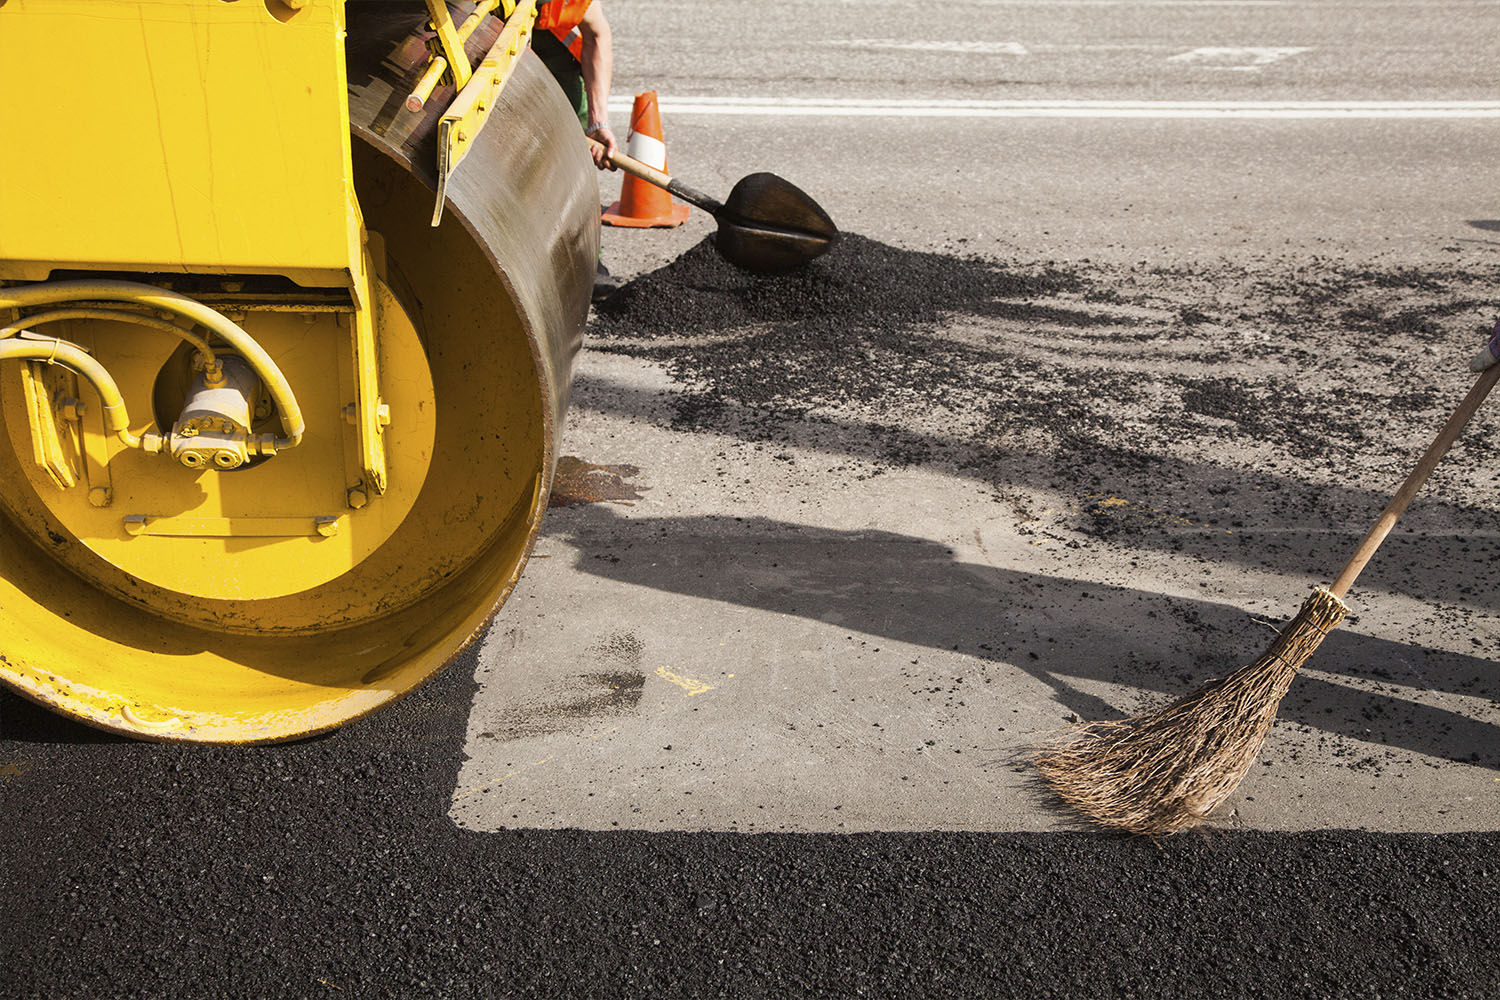 A worker laying fresh asphalt bitumen on a driveway, with shovels and other tools nearby.